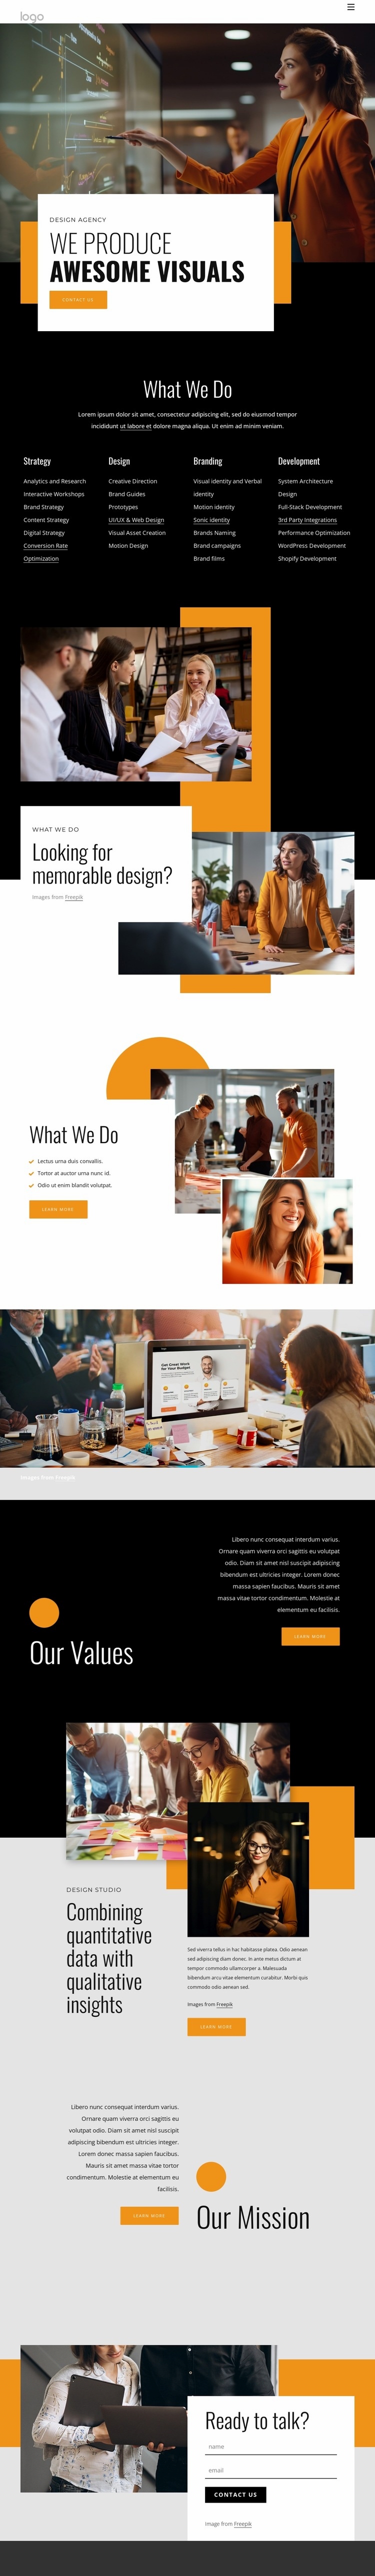 We produce awesome visuals Wix Template Alternative